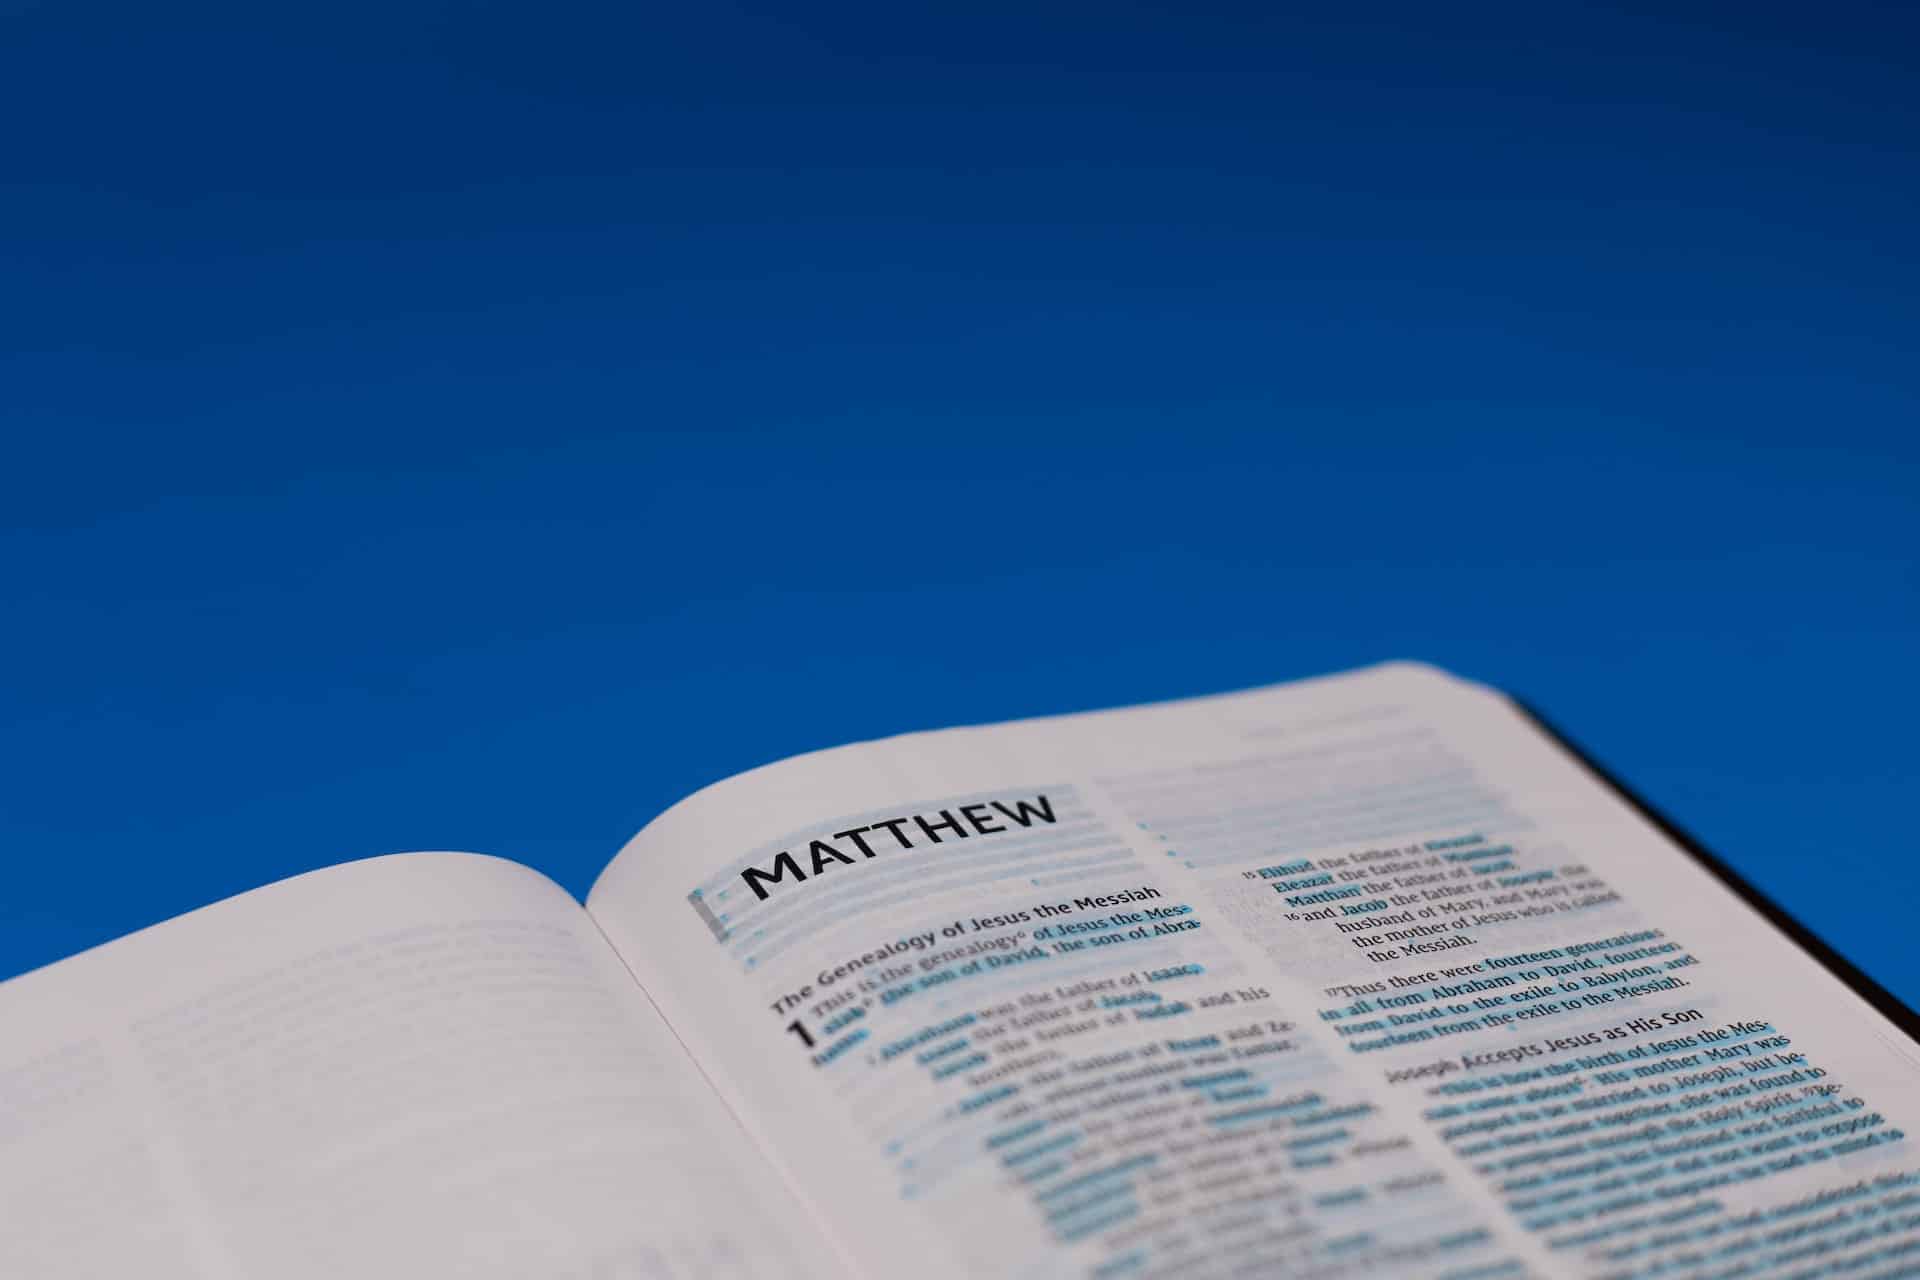 Eunuchs by birth? Matthew 19:12 portrays a Jesus who didn’t judge eunuchs who were 'born that way' — the closest biblical description of what we now call homosexuality.